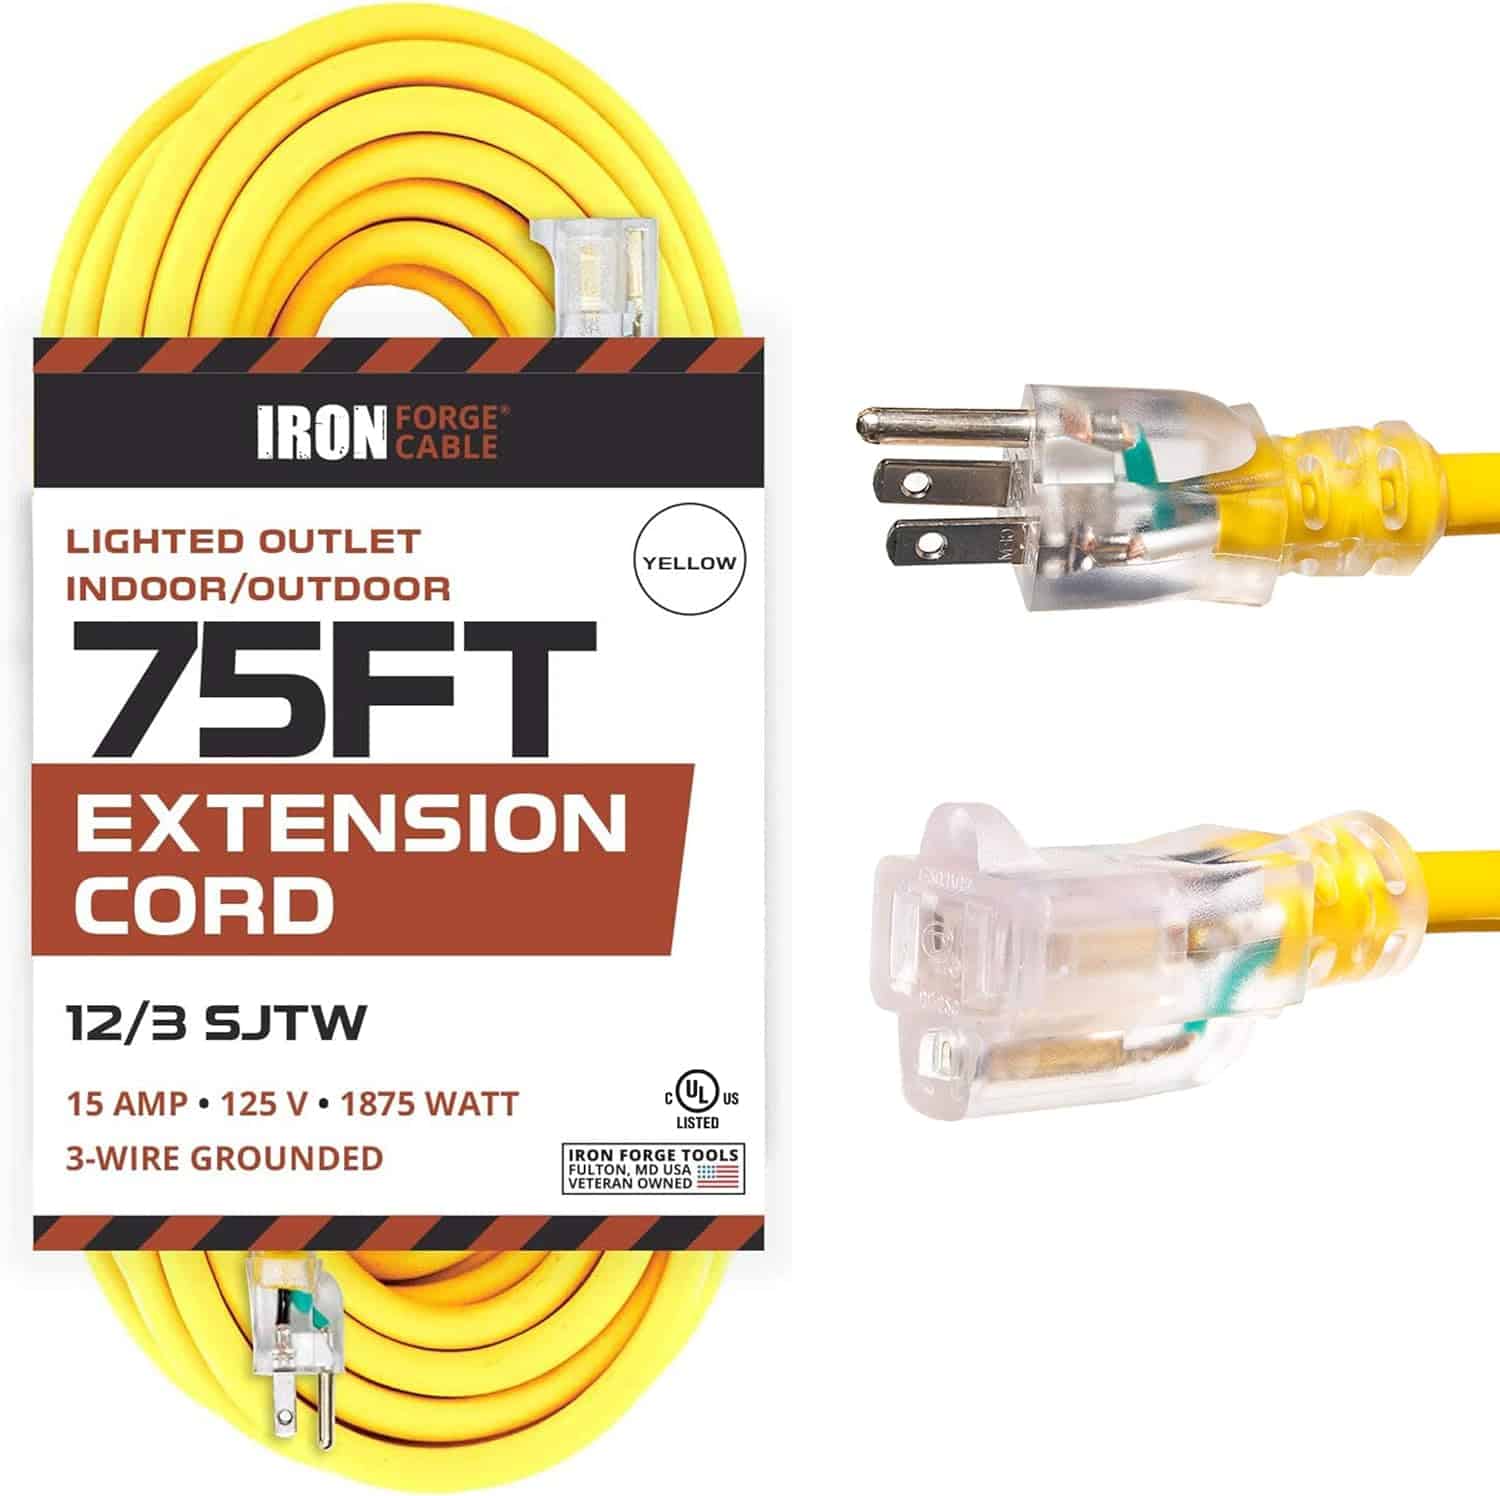 IRON-FORGE-Outdoor-Lighted-Extension-Cord-75-Ft-12-3-SJTW-Heavy-Duty-15-AMP-Yellow-Extension-Cable-with-3-Prong-Grounded-Safety-Plug-12-Gauge-Extension-Cord-For-Garden-Major-Electric-Appliances